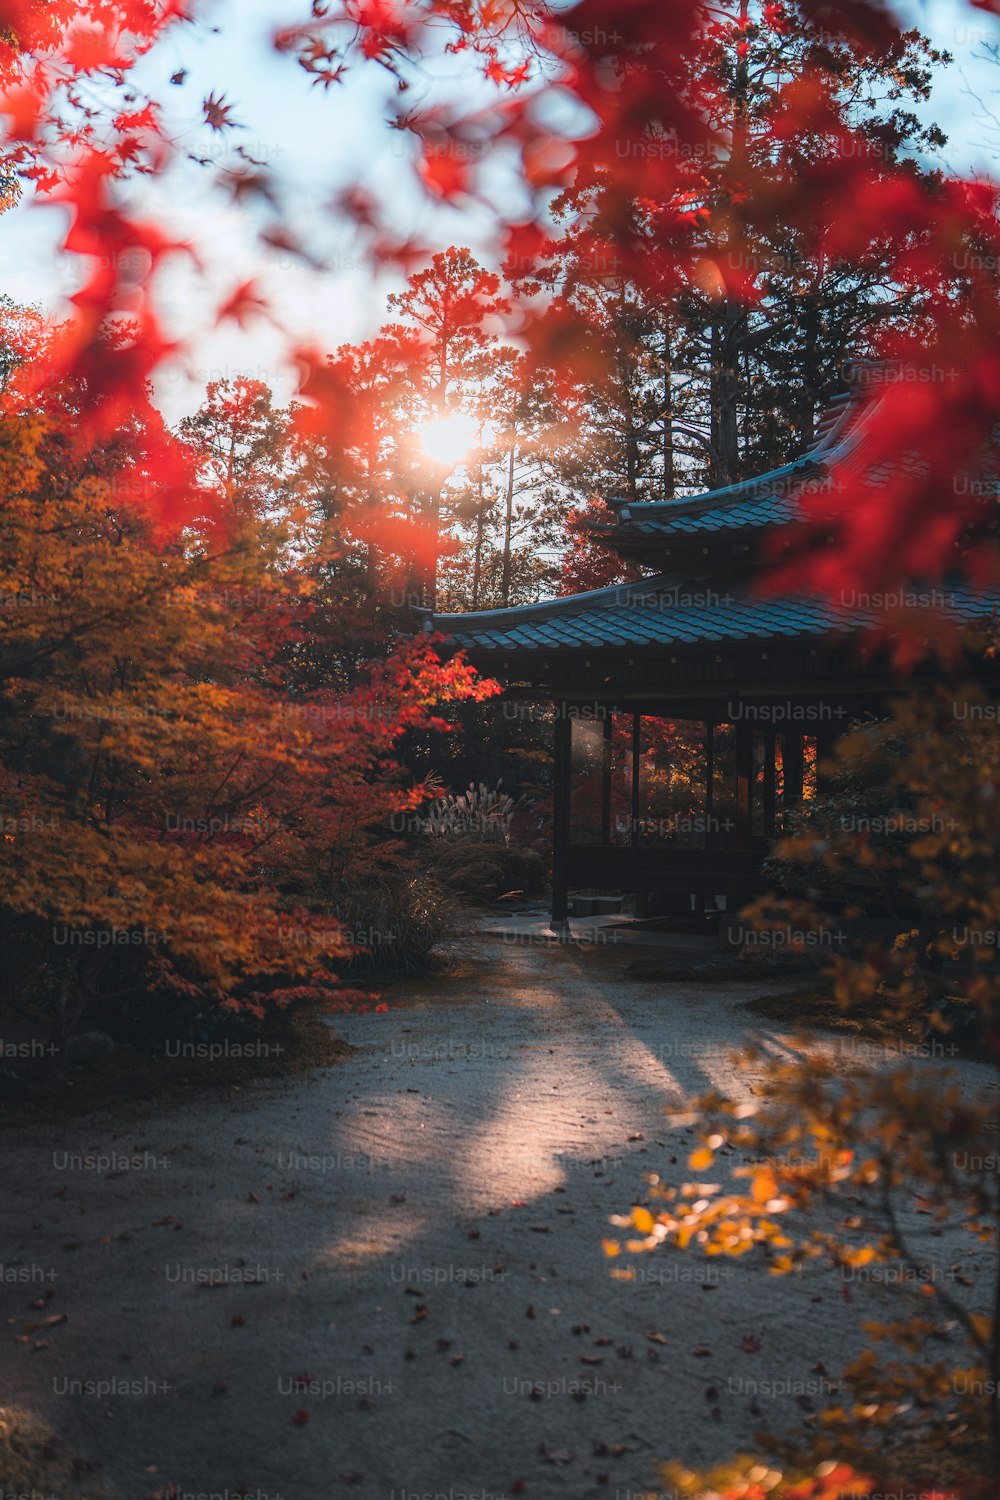 a gazebo surrounded by trees with red leaves